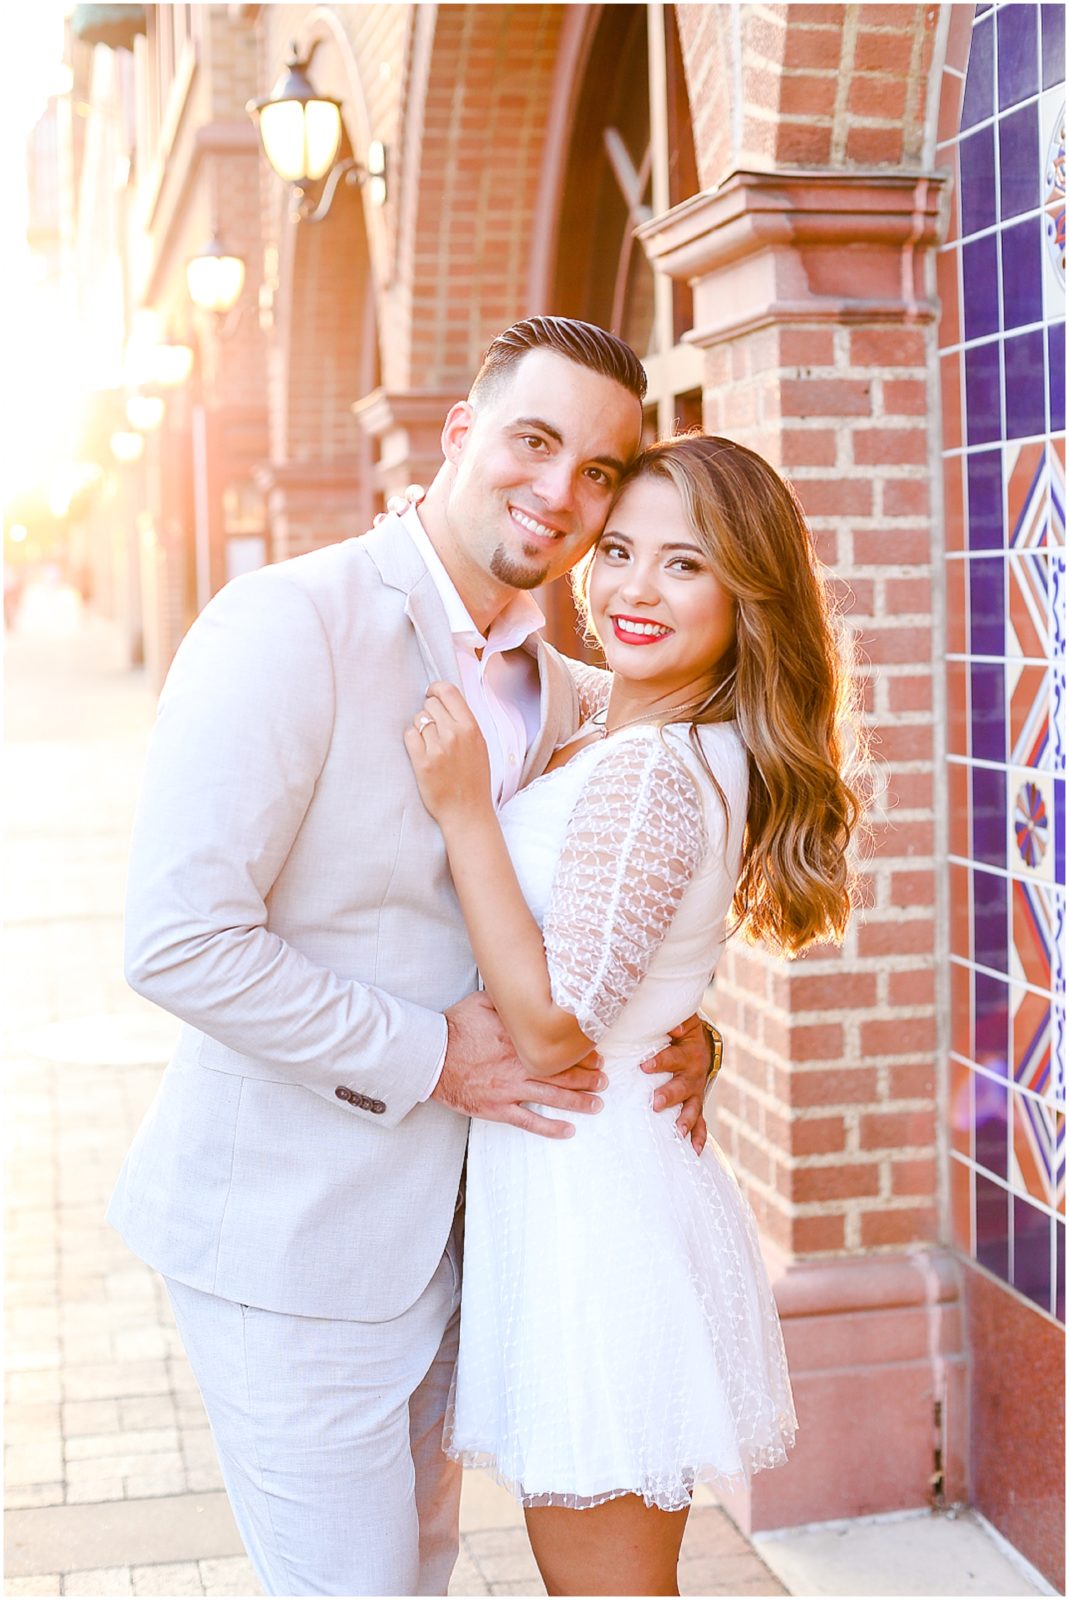 beautiful couple engagement photos at the country club plaza in kansas city and at the liberty memorial - wedding venue at the rhapsody - mariam saifan photography - wedding photographer in KC